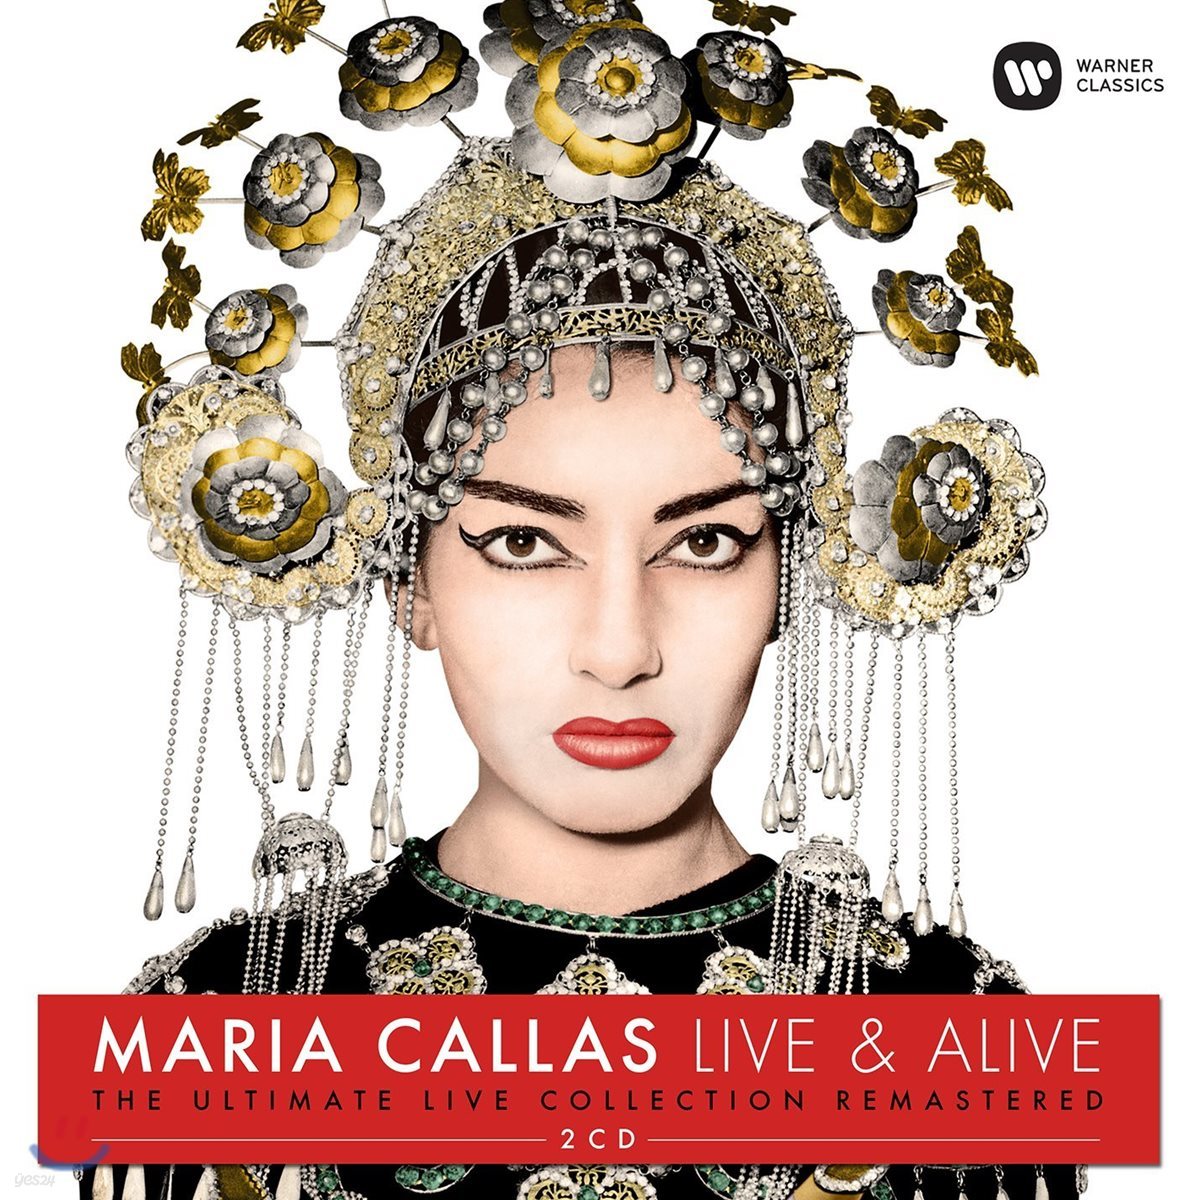 Maria Callas 마리아 칼라스 라이브 컬렉션 (Live & Alive - The Ultimate Live Collection Remastered)